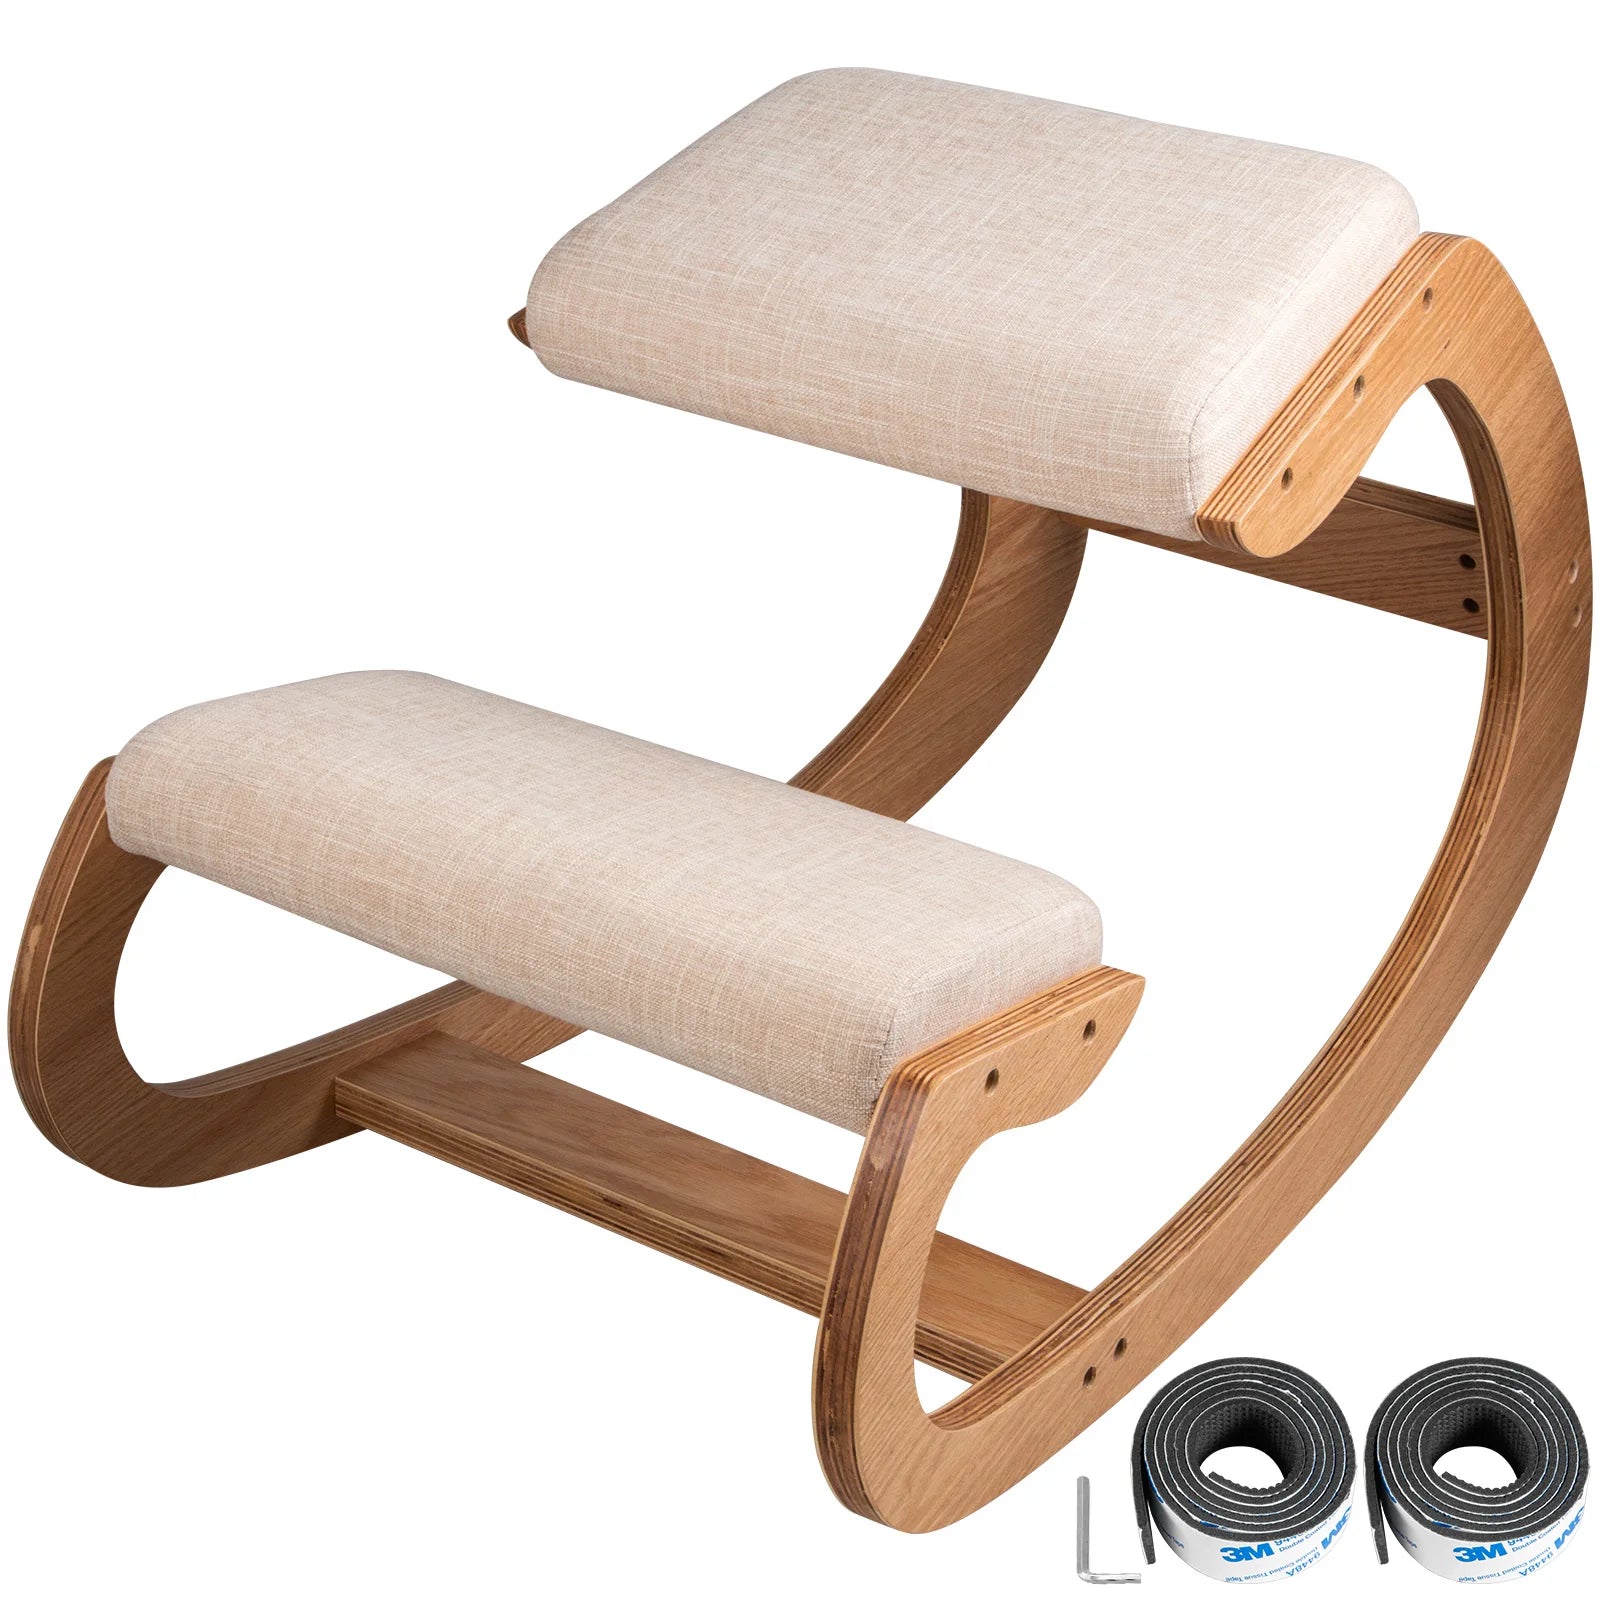 Wooden Ergonomic Kneeling Chair - Correct Posture Work Stool with Thick Cushion for Home Office